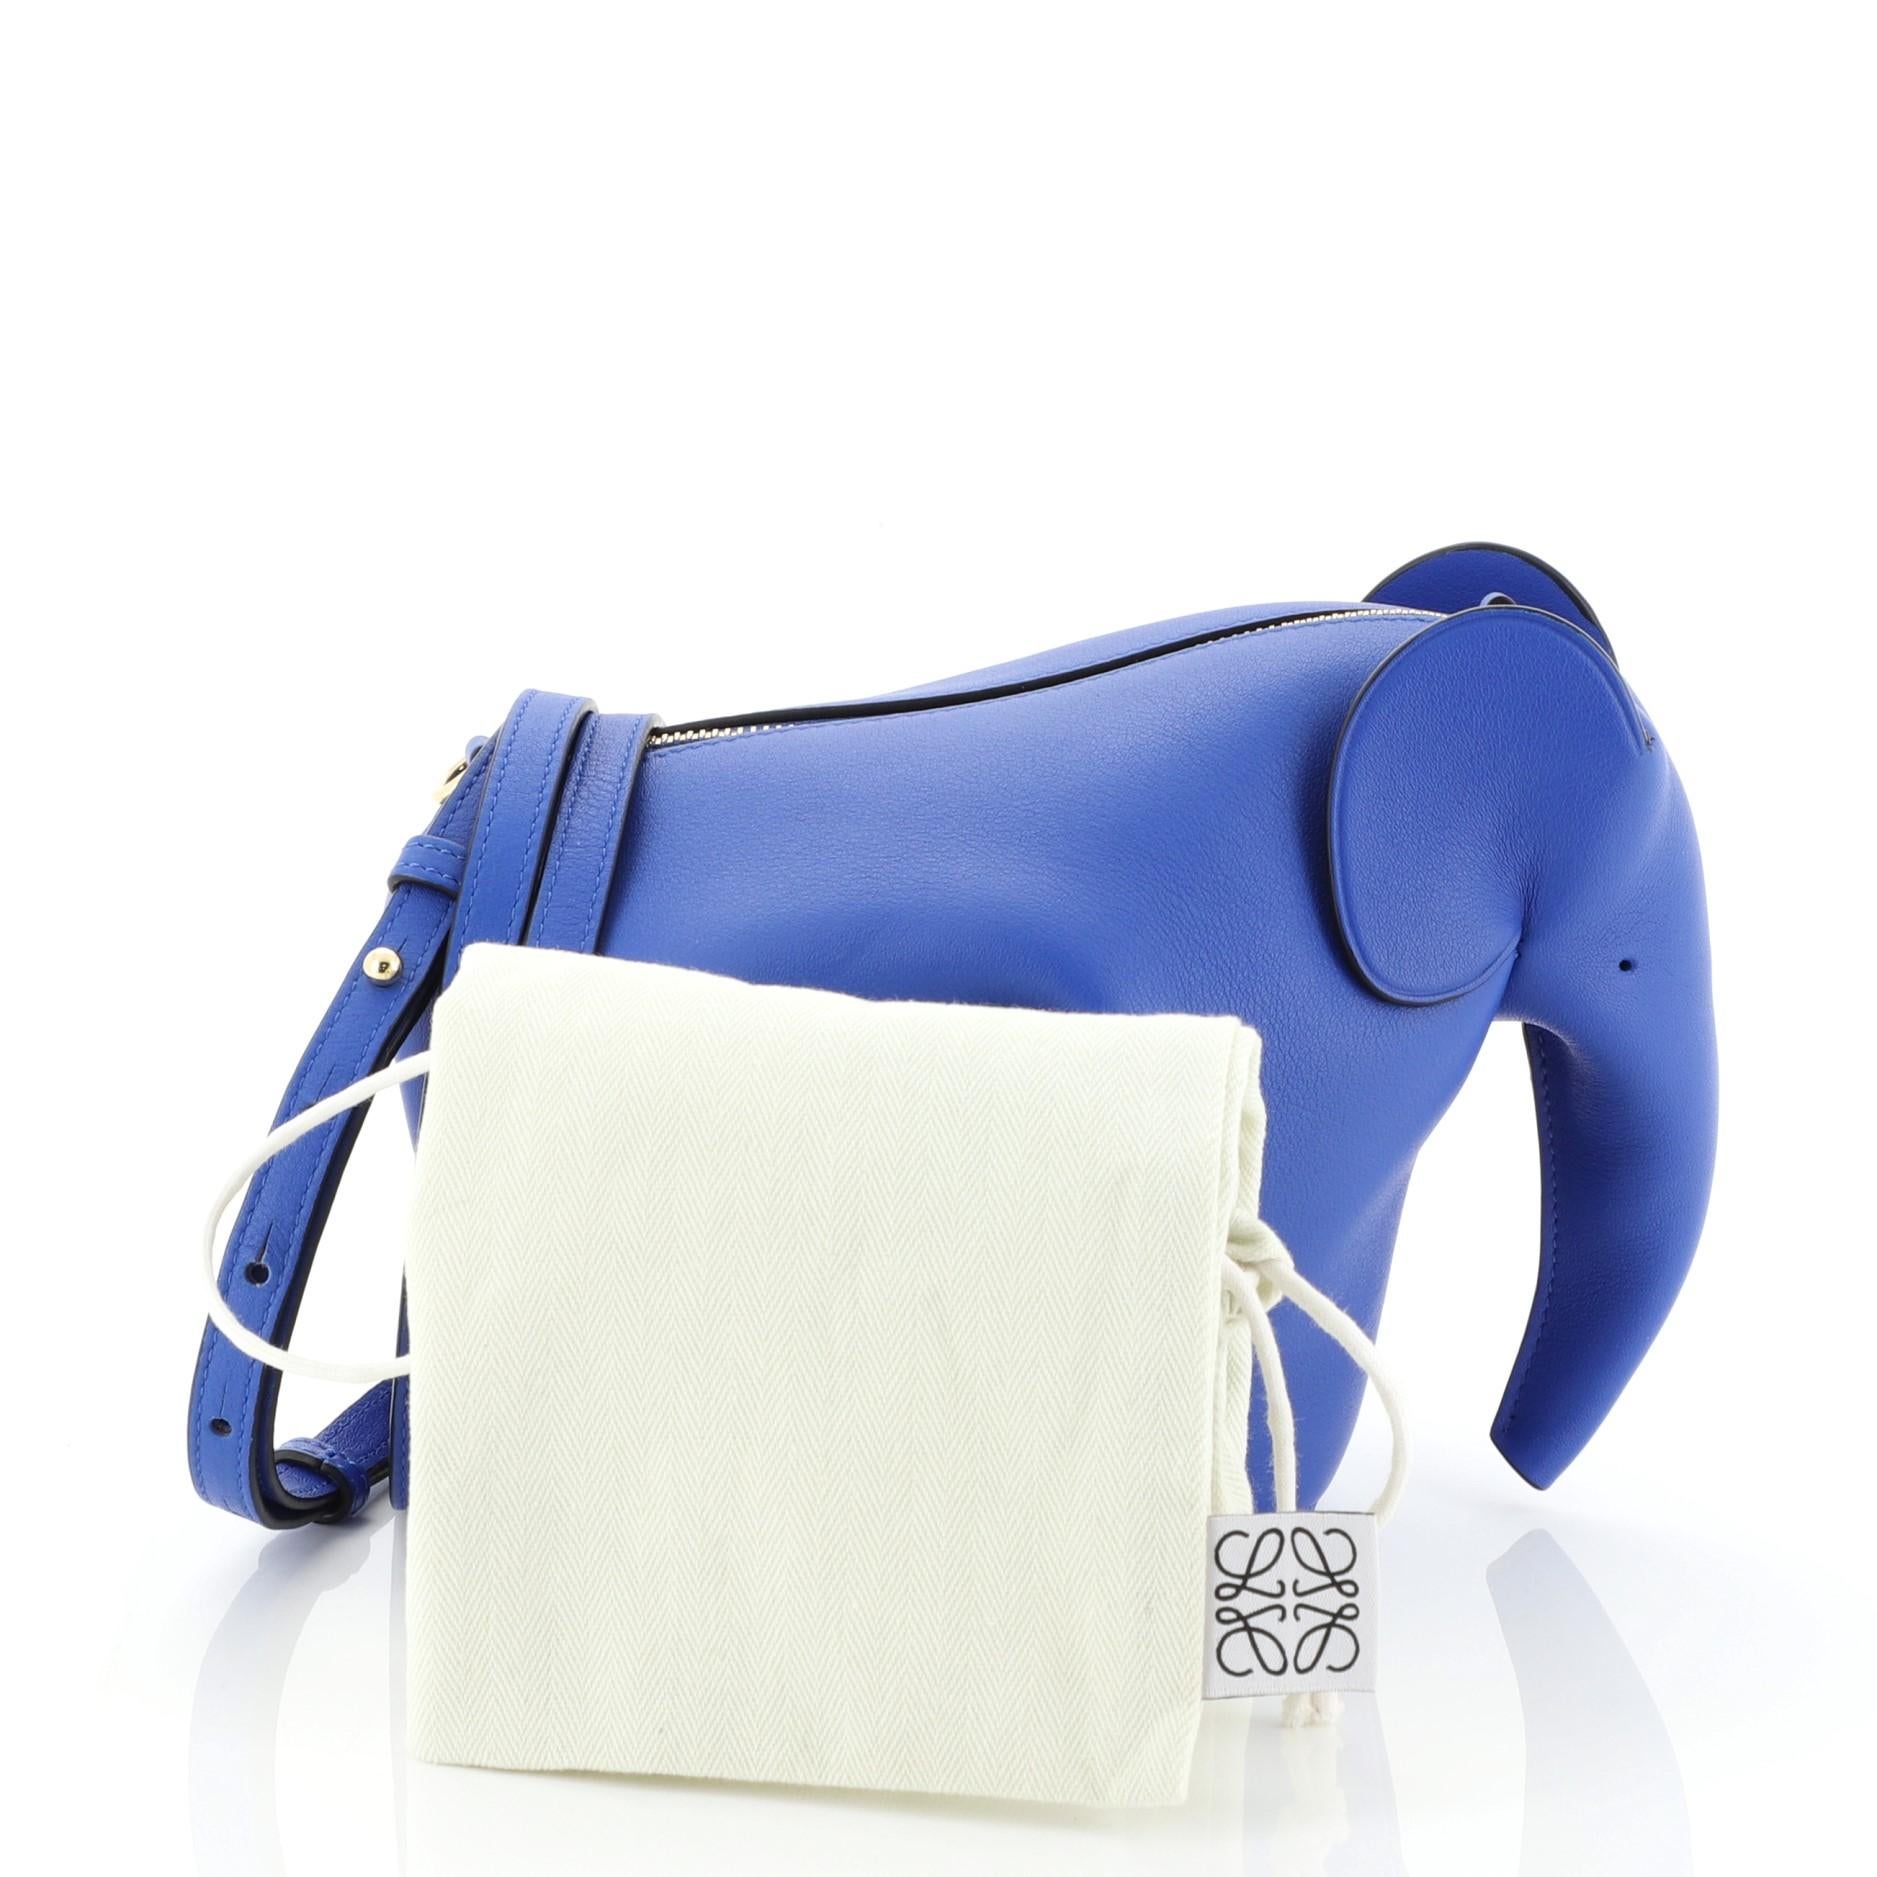 This Loewe Elephant Crossbody Bag Leather Mini, crafted in blue leather, features an adjustable crossbody strap, an elephant silhouette complete with a long trunk and dot-perforated 